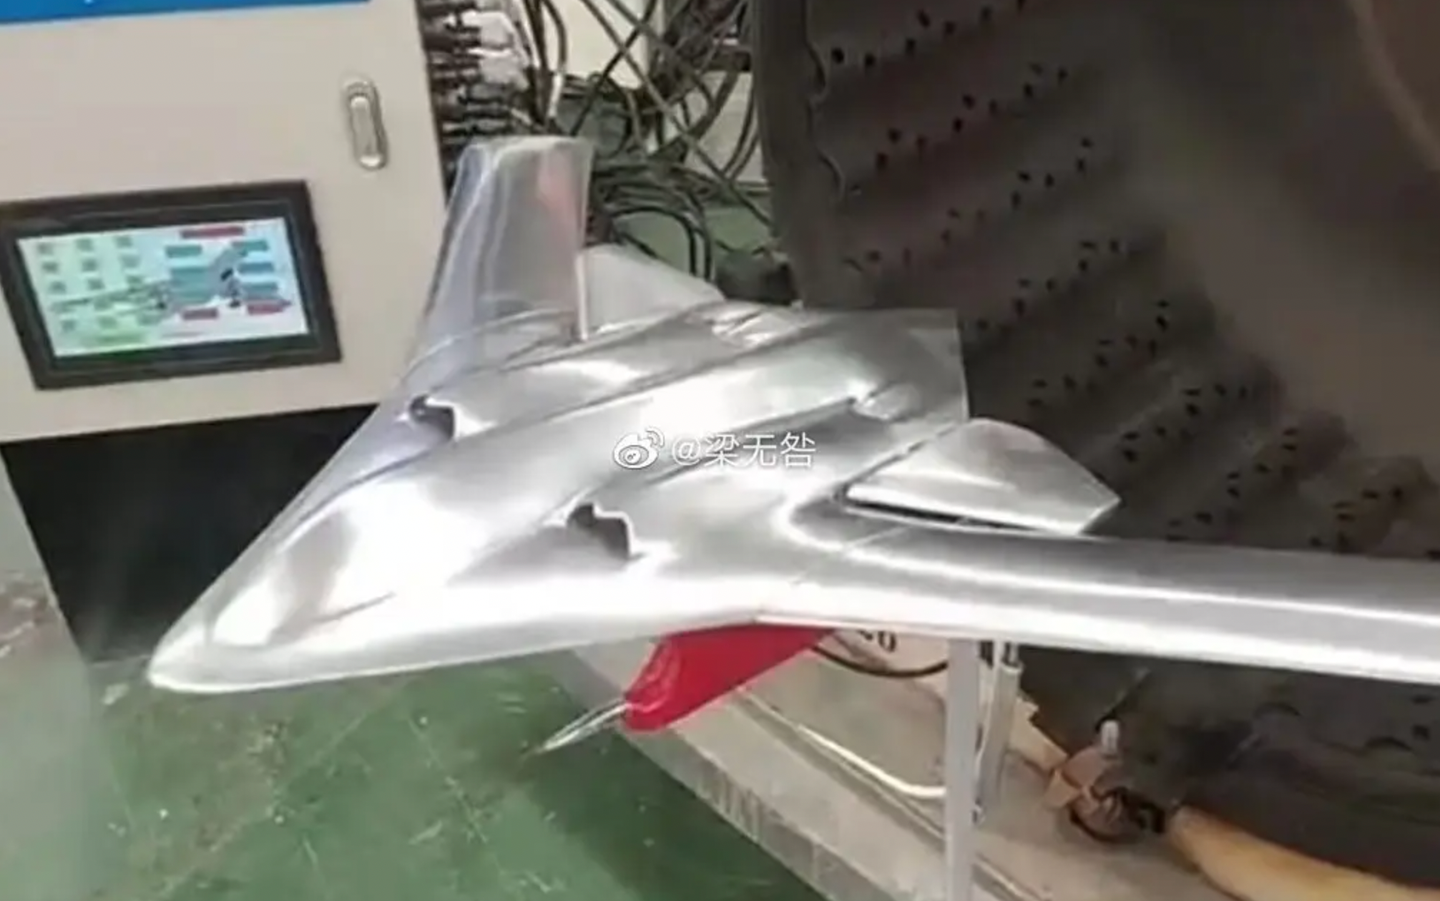 A wind tunnel model showing a new aircraft design, or at least a concept, that seems to have strong similarities to how the H-20 is&nbsp;<em>expected</em>&nbsp;to look. <em>via X</em>